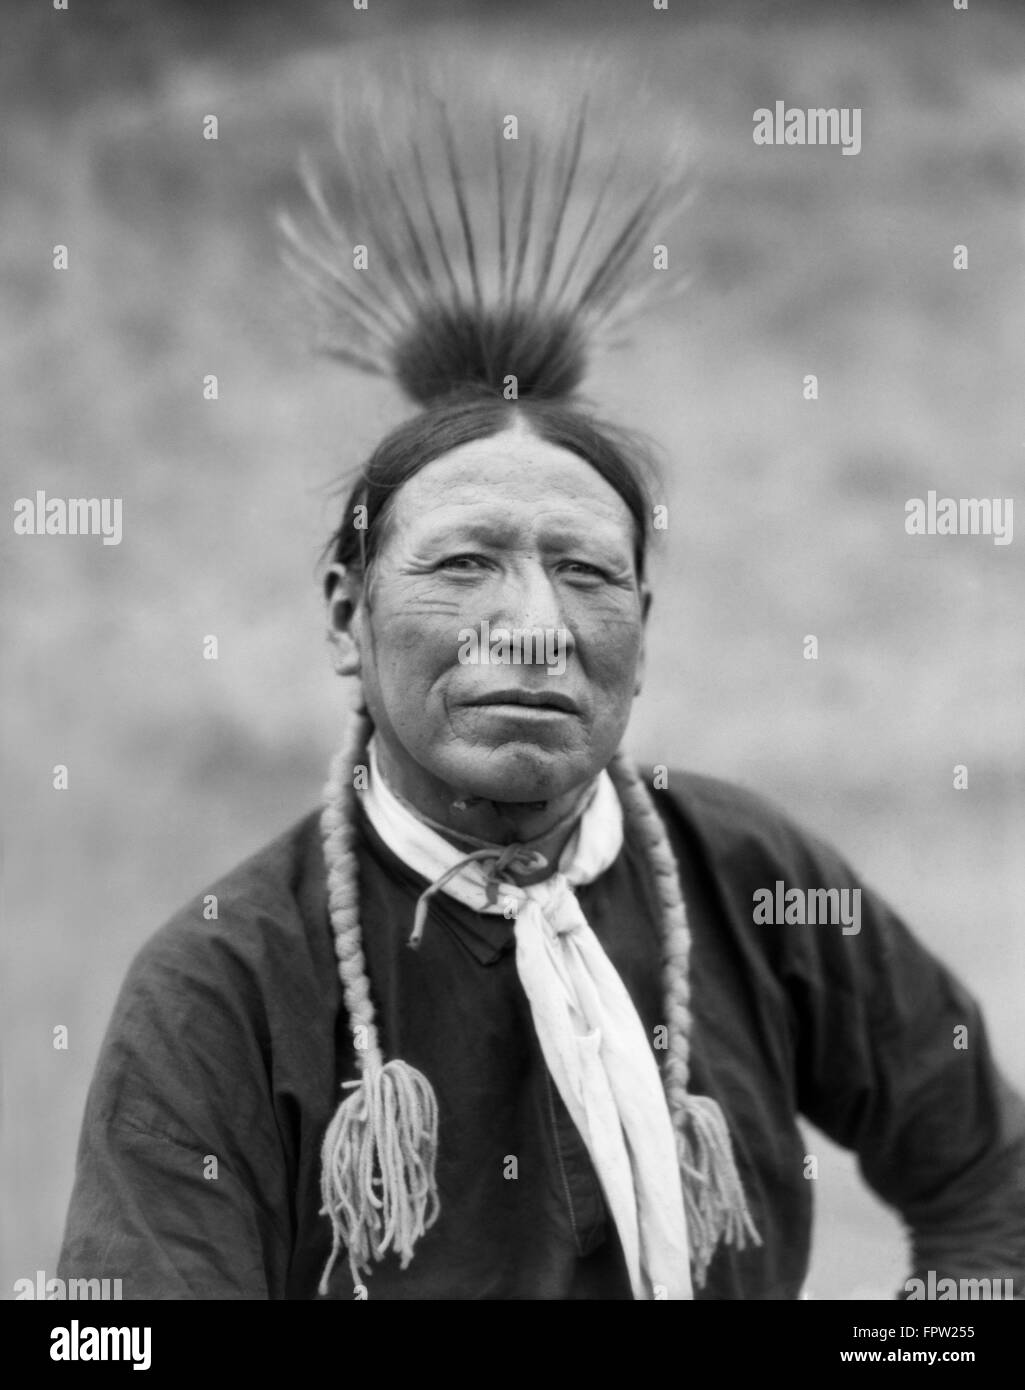 1920s PORTRAIT HANDSOME NATIVE AMERICAN INDIAN MAN OF KOOTENAY TRIBE WEARING FEATHERS AND BRAIDS LOOKING AT CAMERA Stock Photo